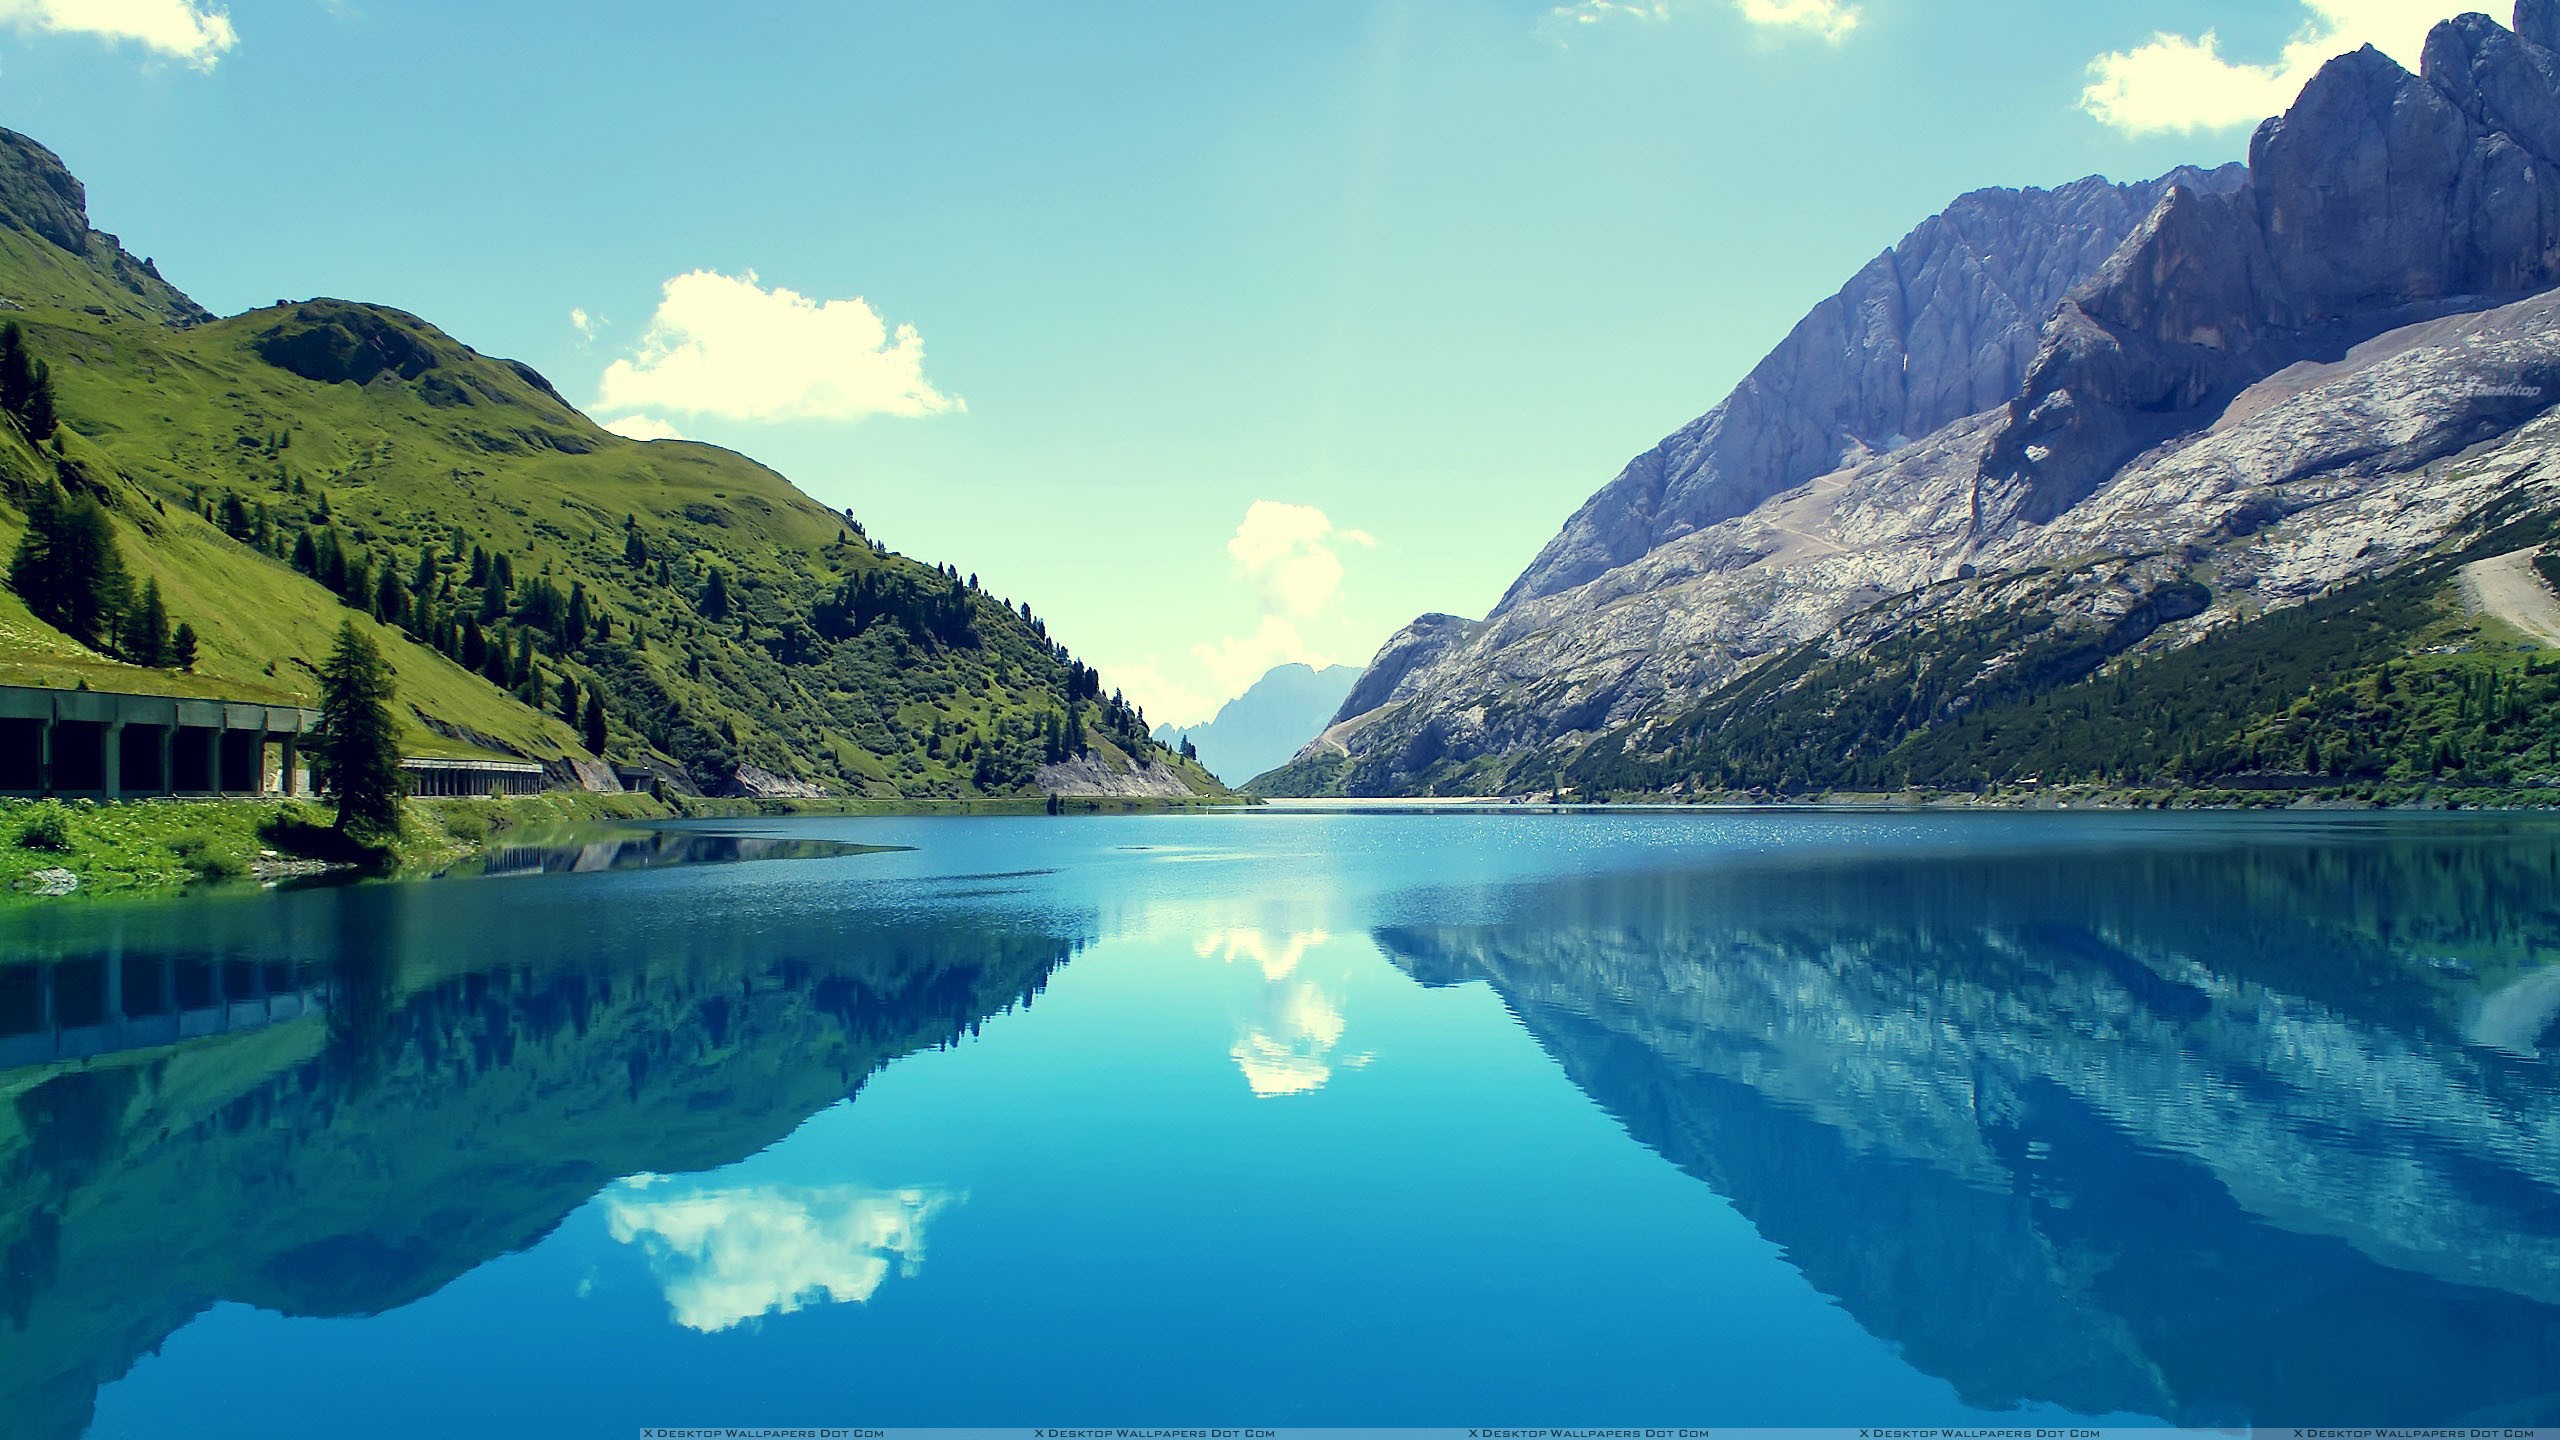 The Reflection Of Mountains In Water Looking Beautiful Wallpaper